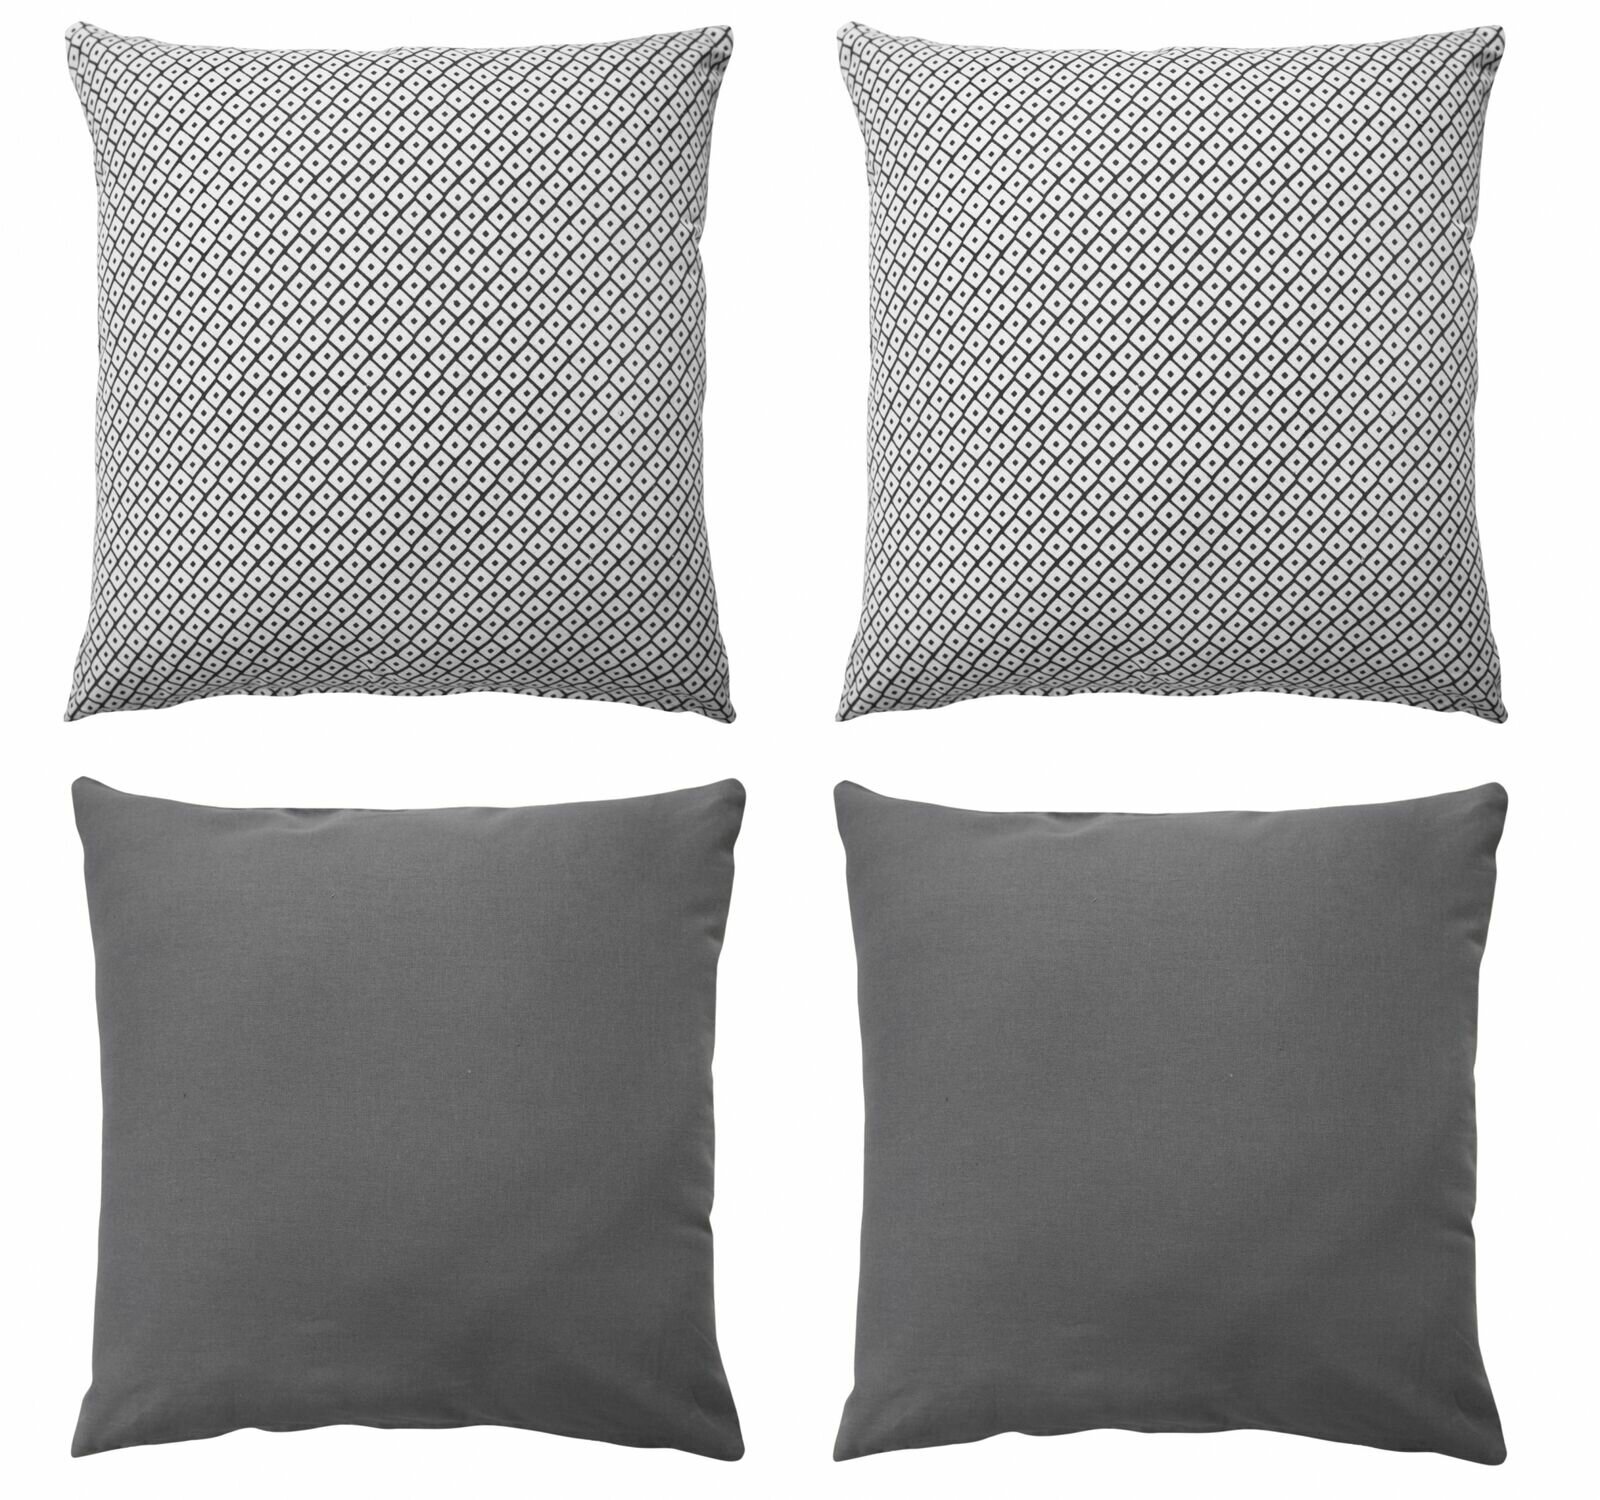 

4Pcs Cushion Cover Set 45x45cm Polyester Grey Pillow Cover For Cushions Pillows